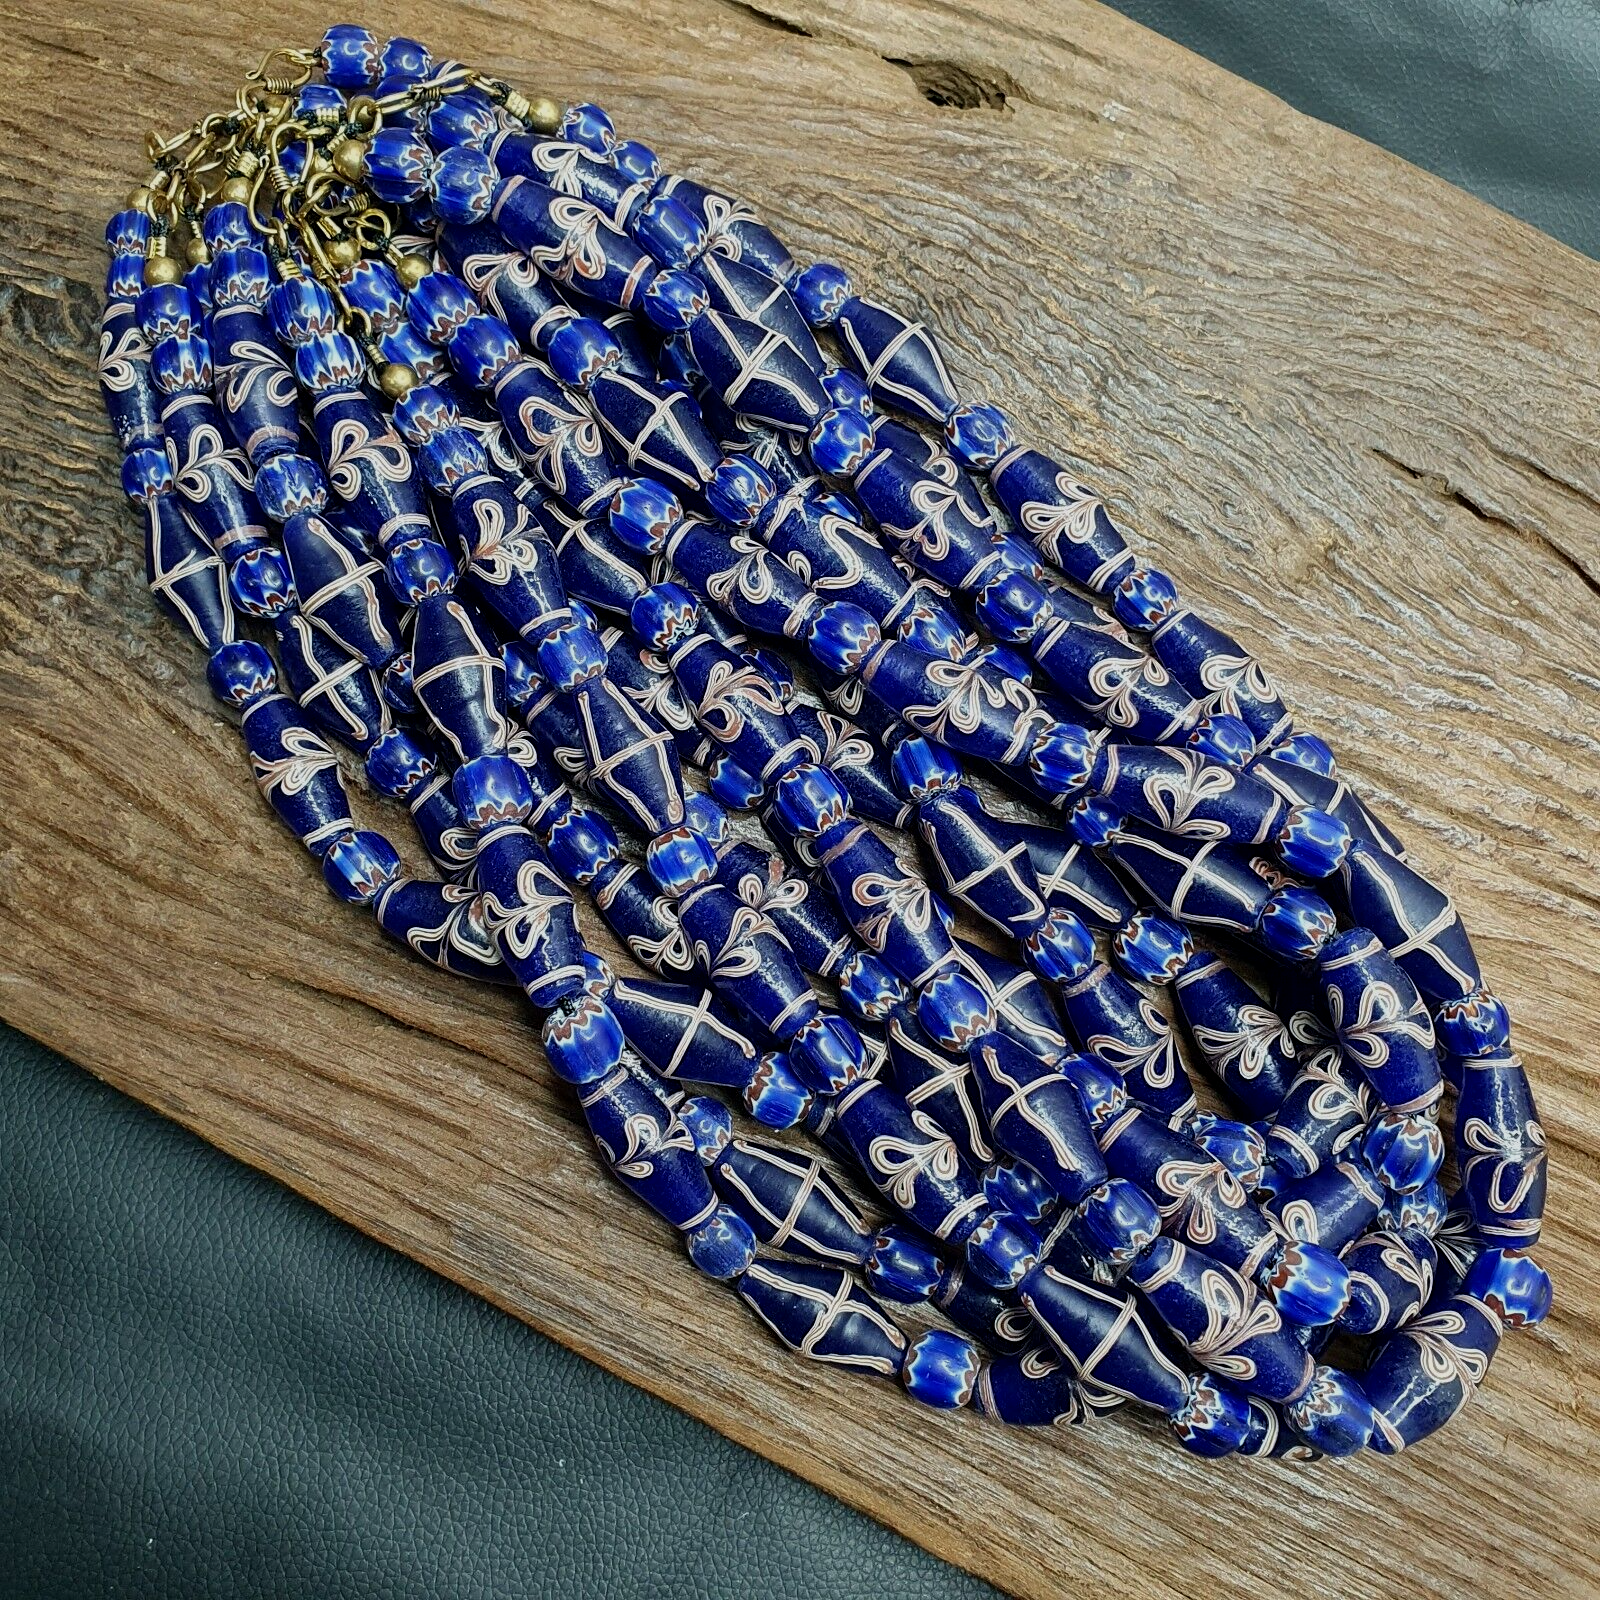 Beautiful Vintage Blue Floral ART Fancy and Chevron GLASS beads necklace